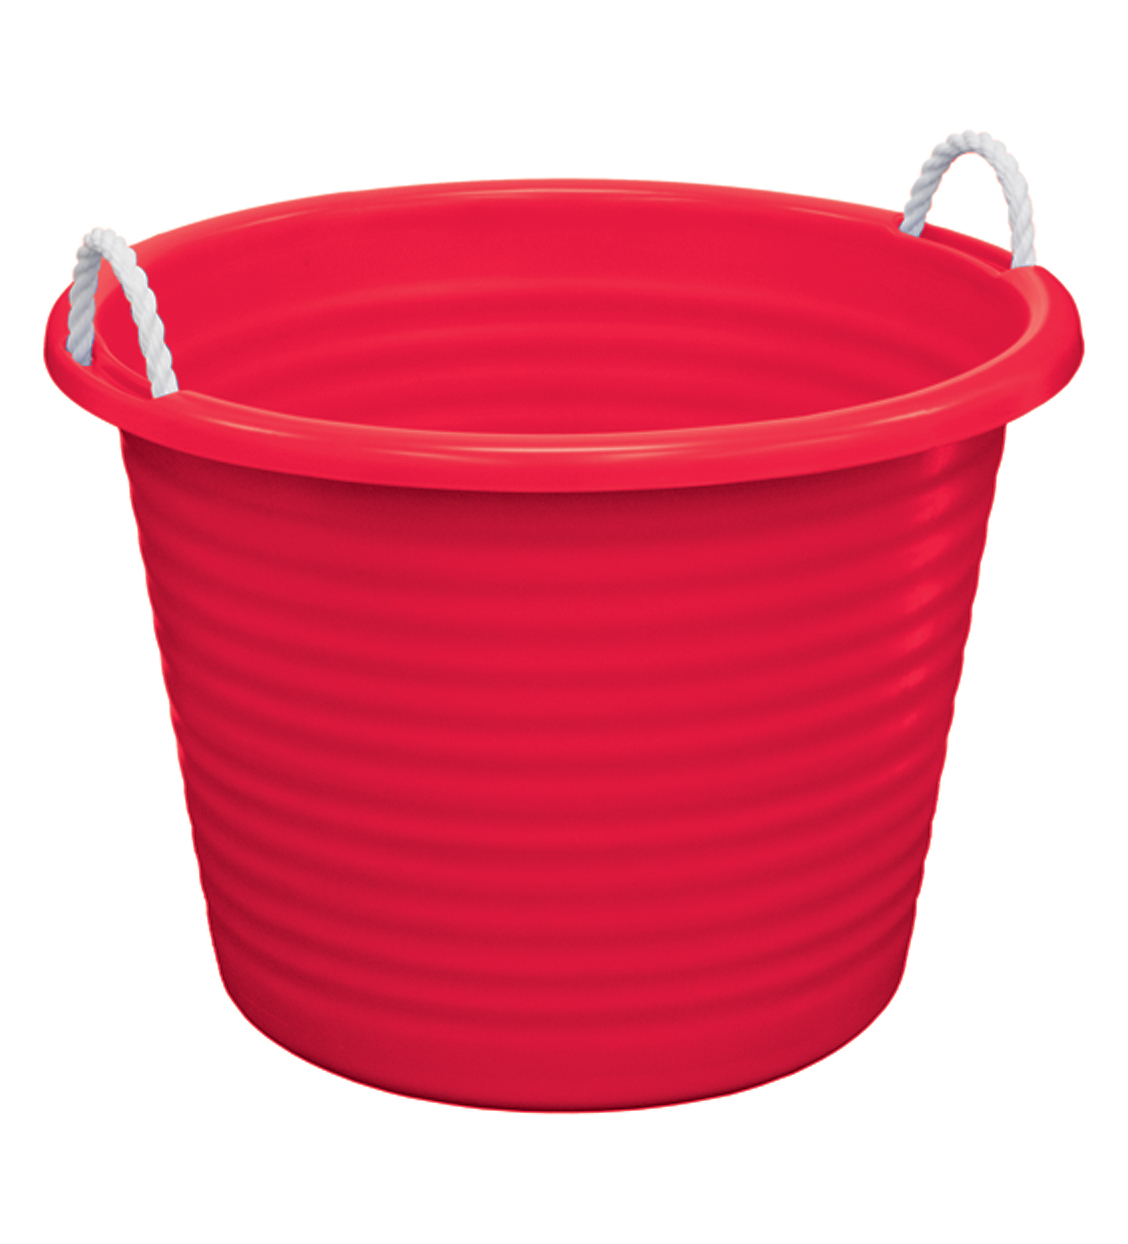 United Solutions Party Tub With Rope Handles 17 Gallon Red